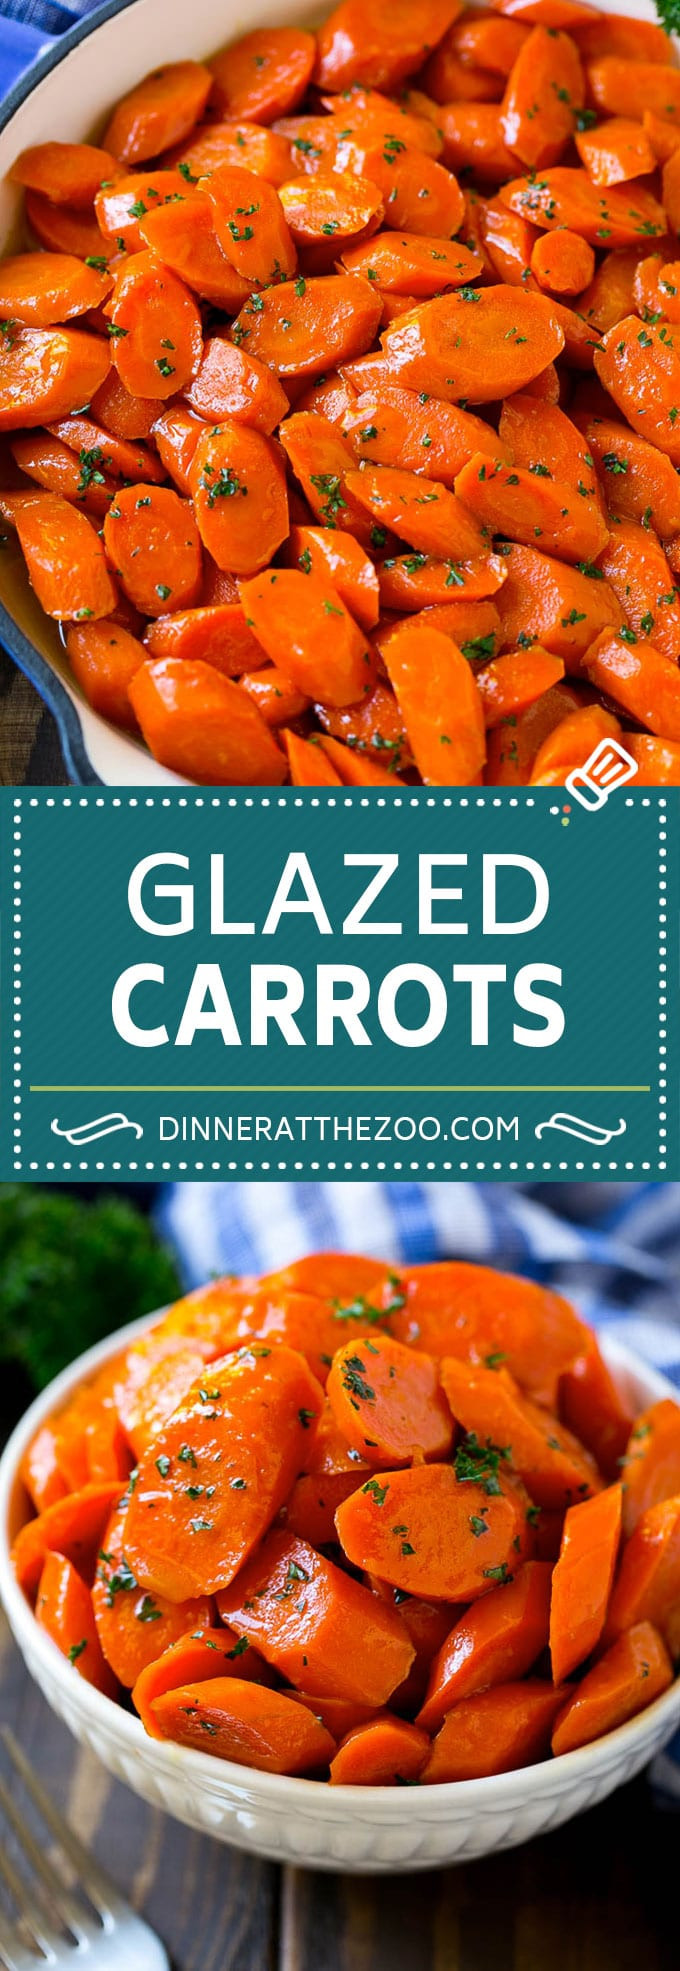 Carrots Recipe Thanksgiving
 Glazed Carrots Dinner at the Zoo